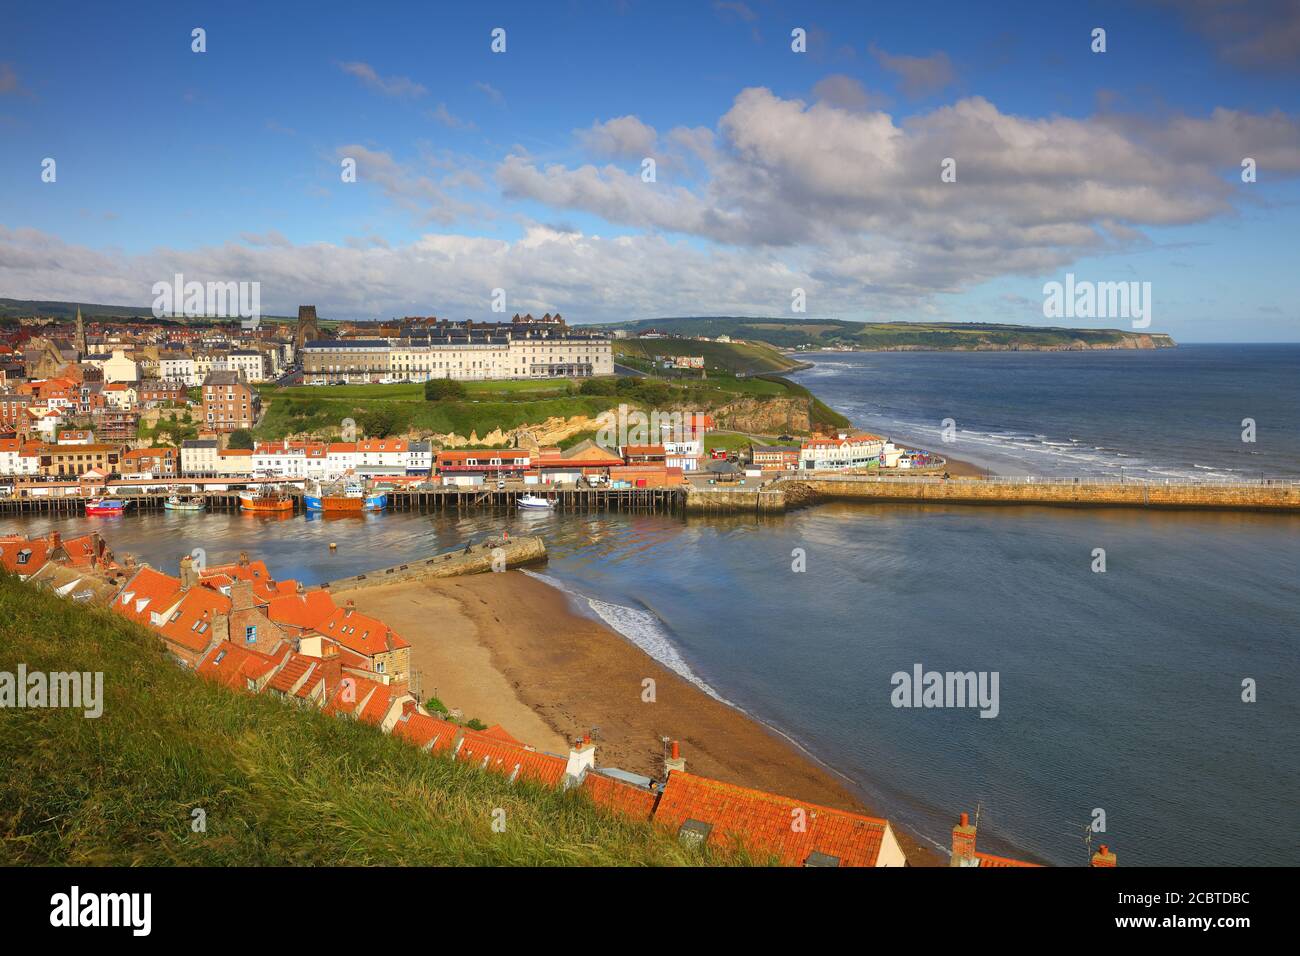 Landscape image of Whitby with a Beach in the foreground and Blue Sky, North Yorkshire, England, UK. Stock Photo